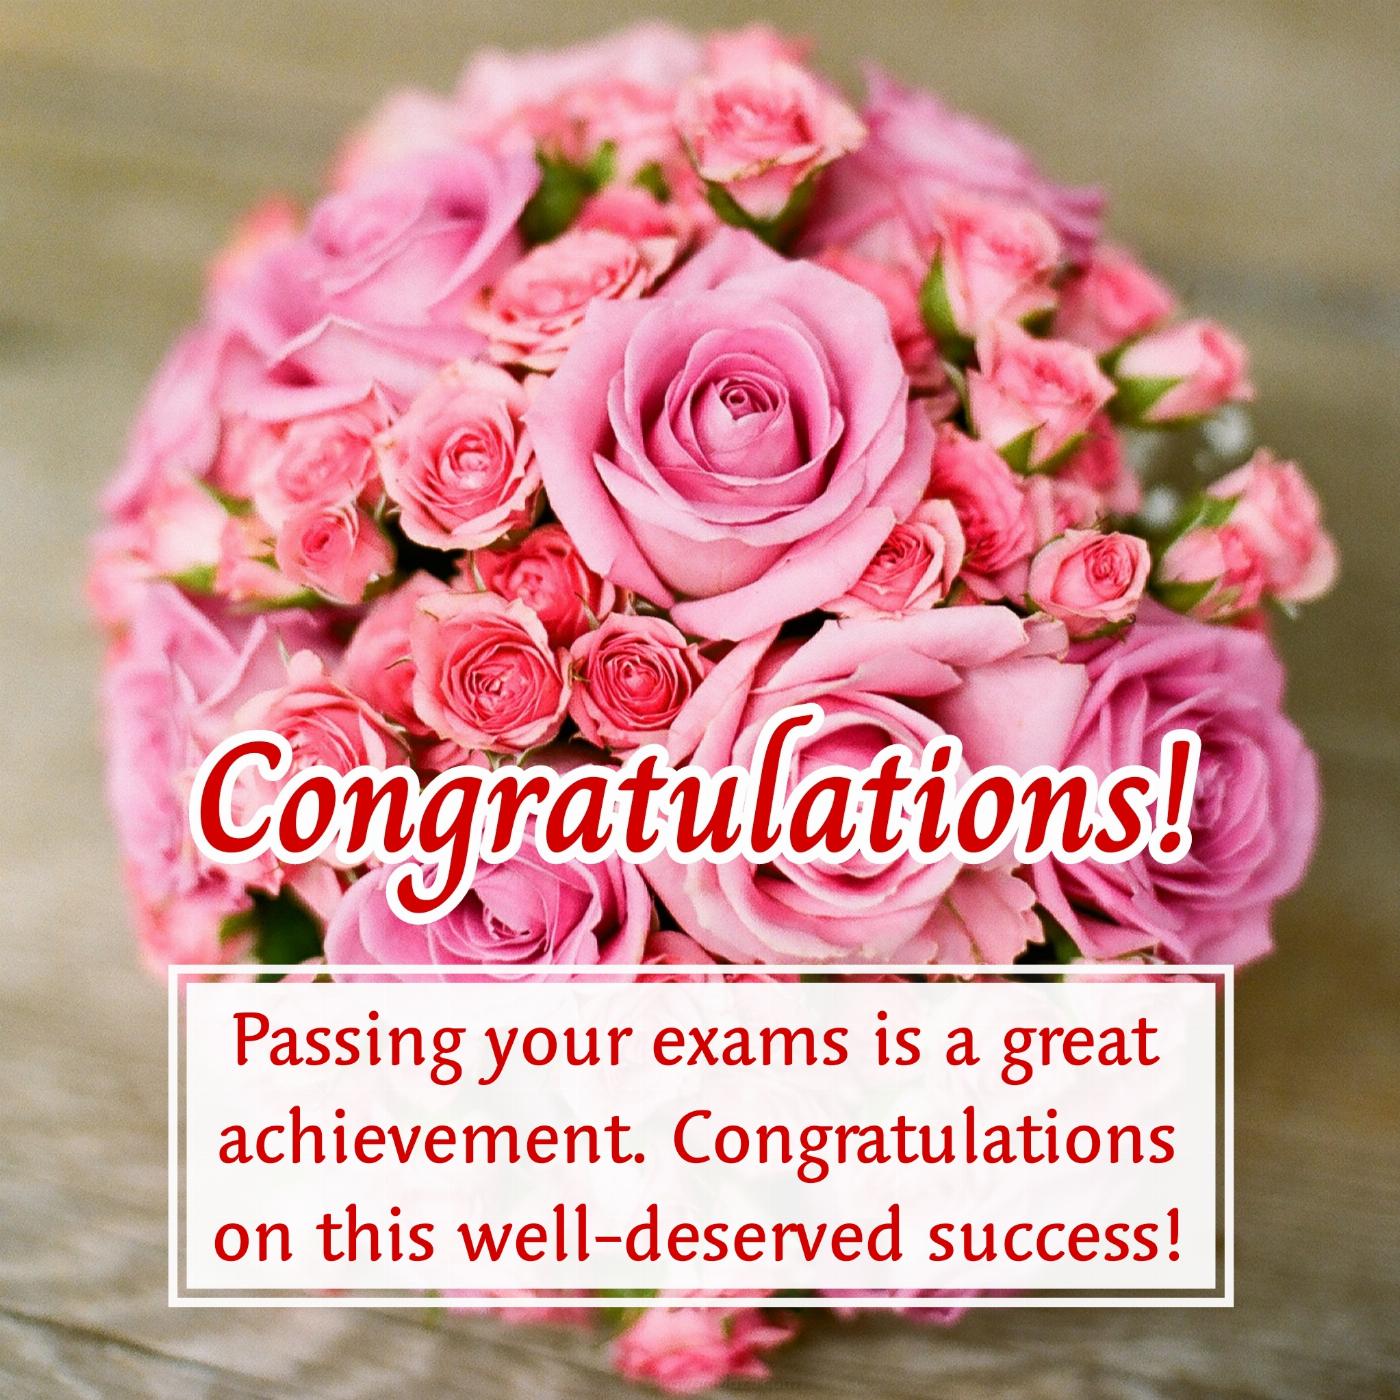 Passing your exams is a great achievement